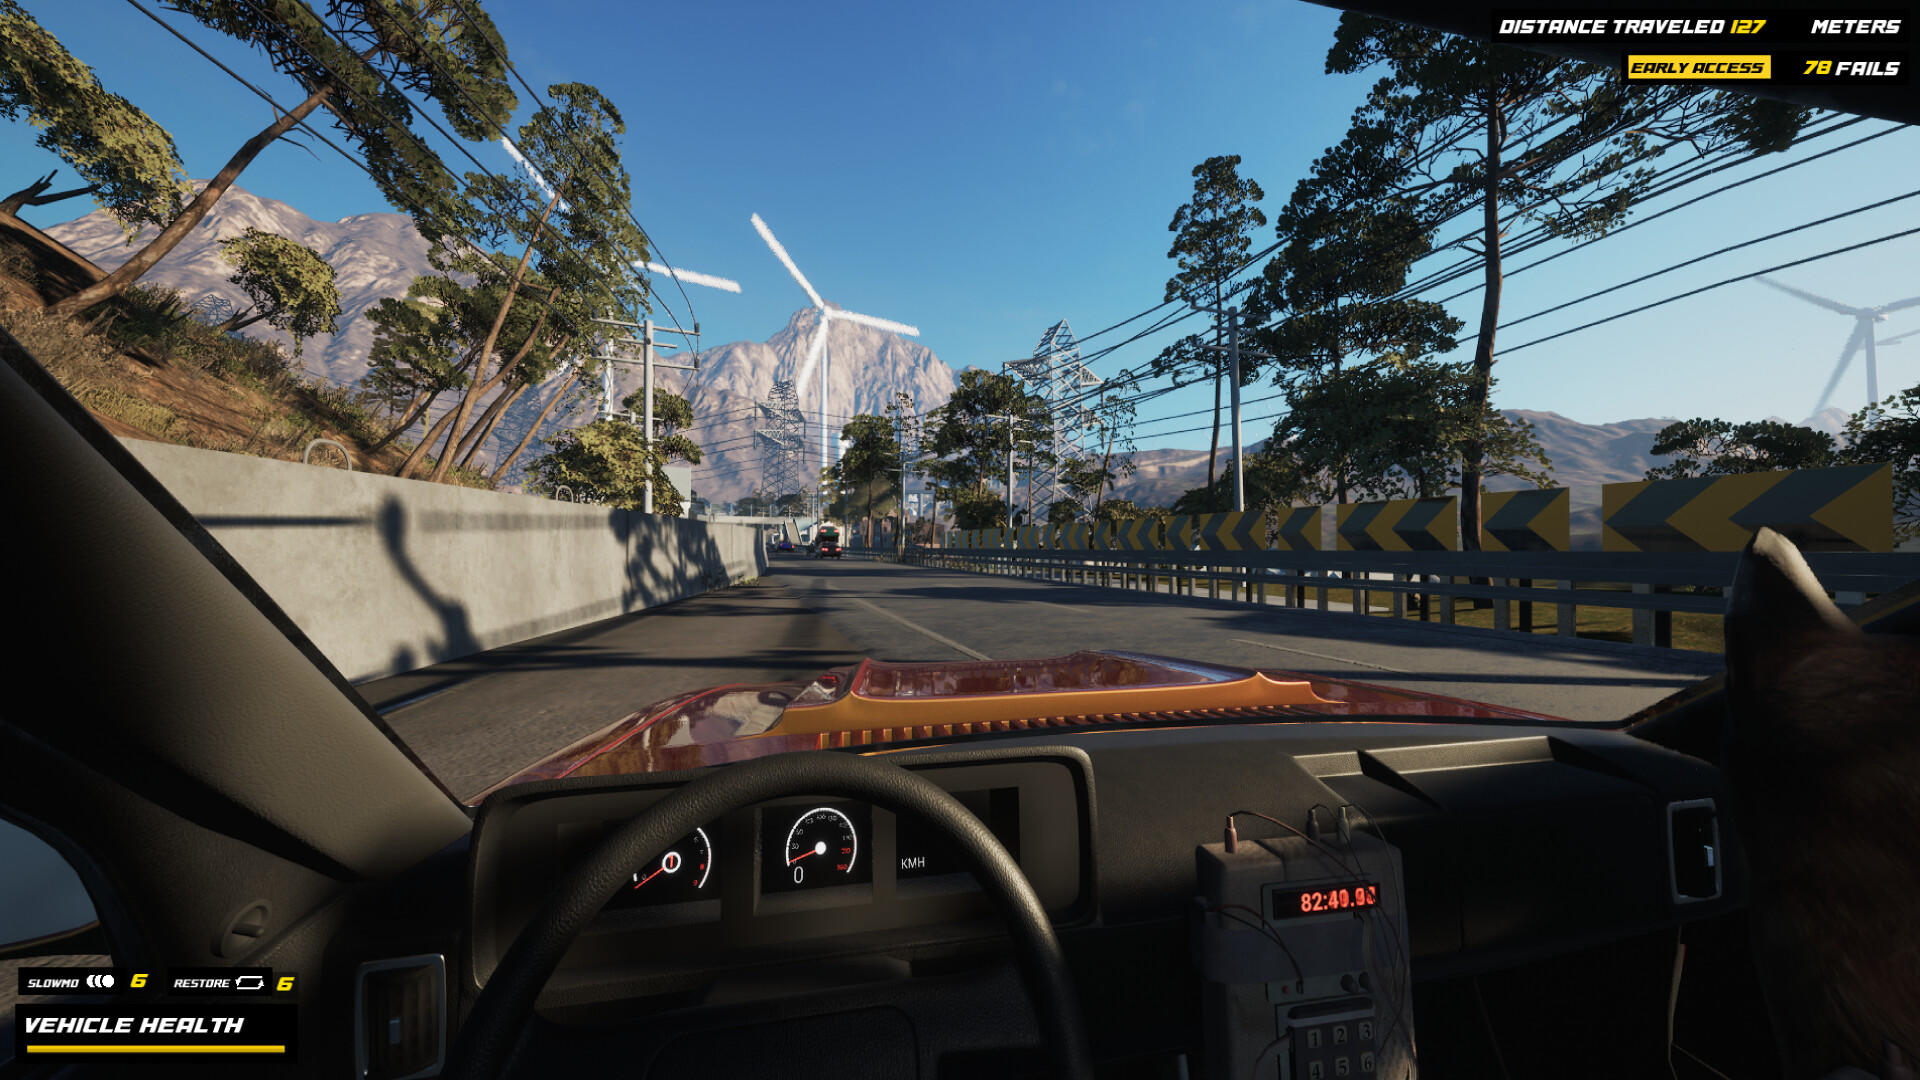 Only Drive screenshot game